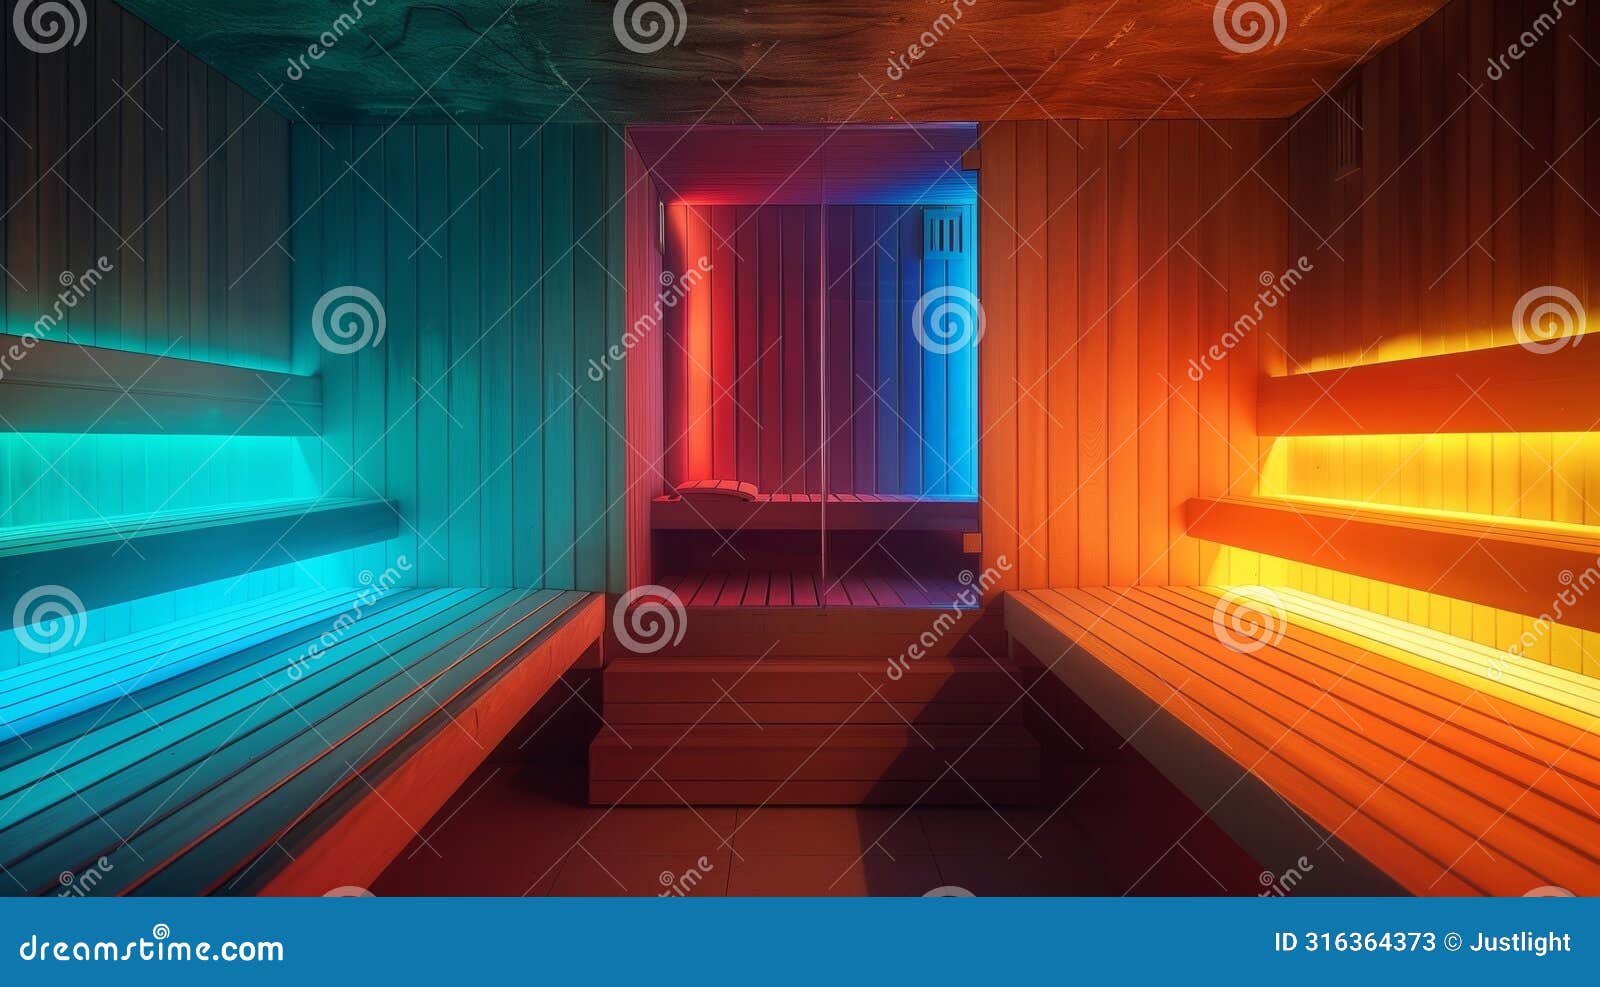 the sauna room gradually changing colors from warm oranges and reds to calming blues and greens.